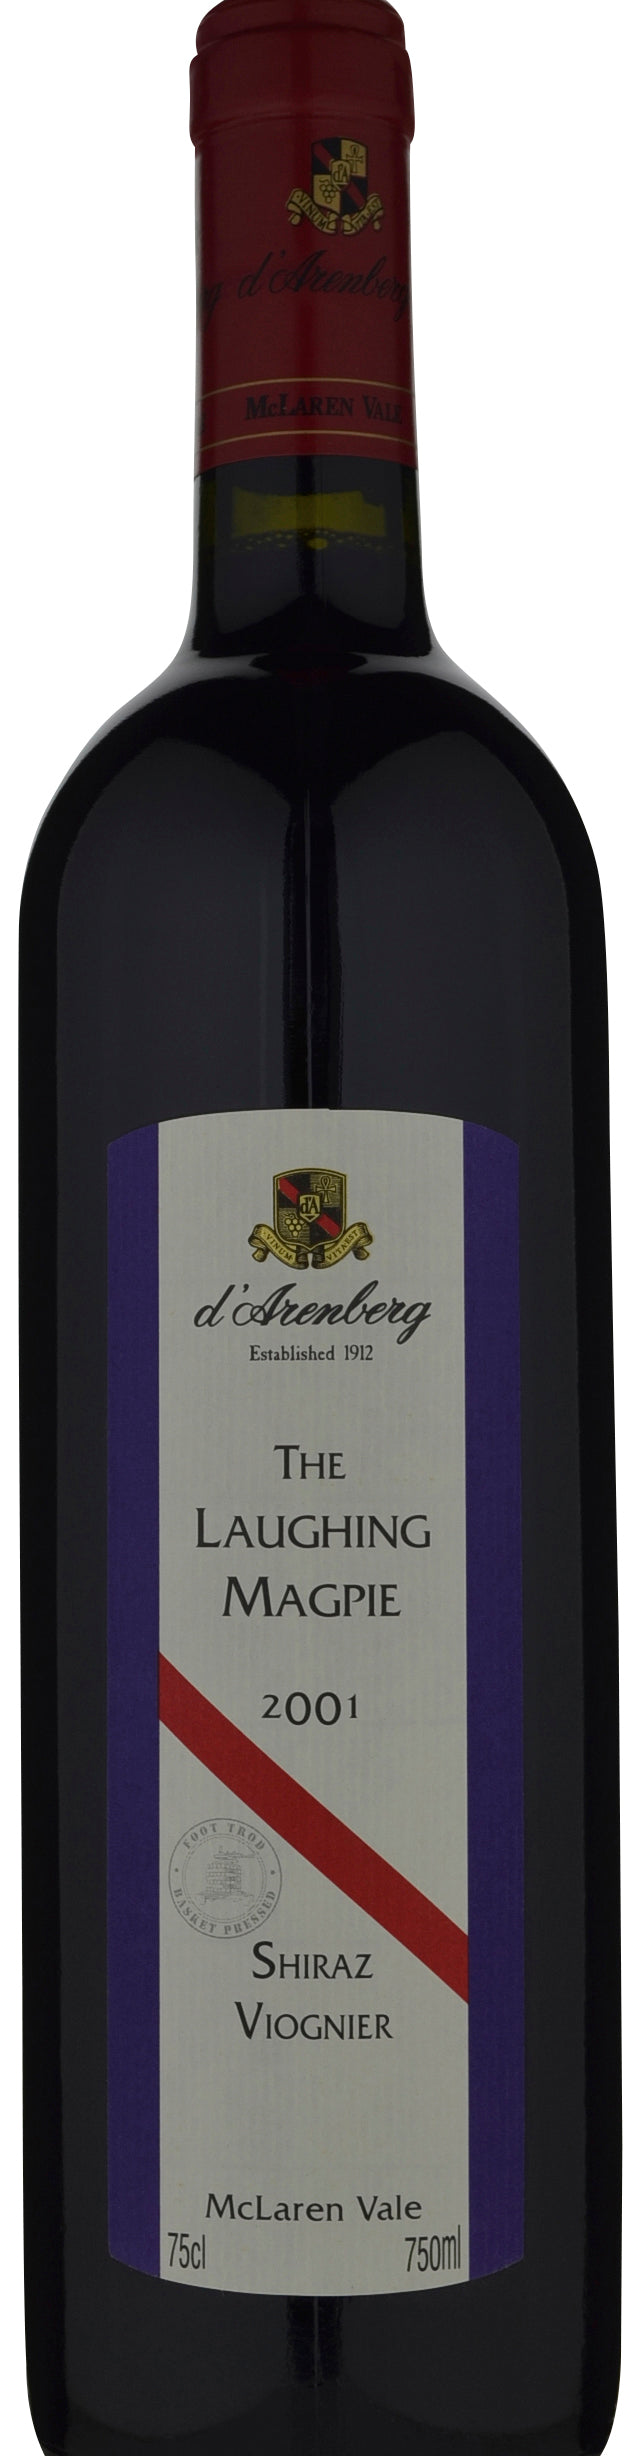 d'Arenberg The Laughing Magpie Shiraz Viognier 2001